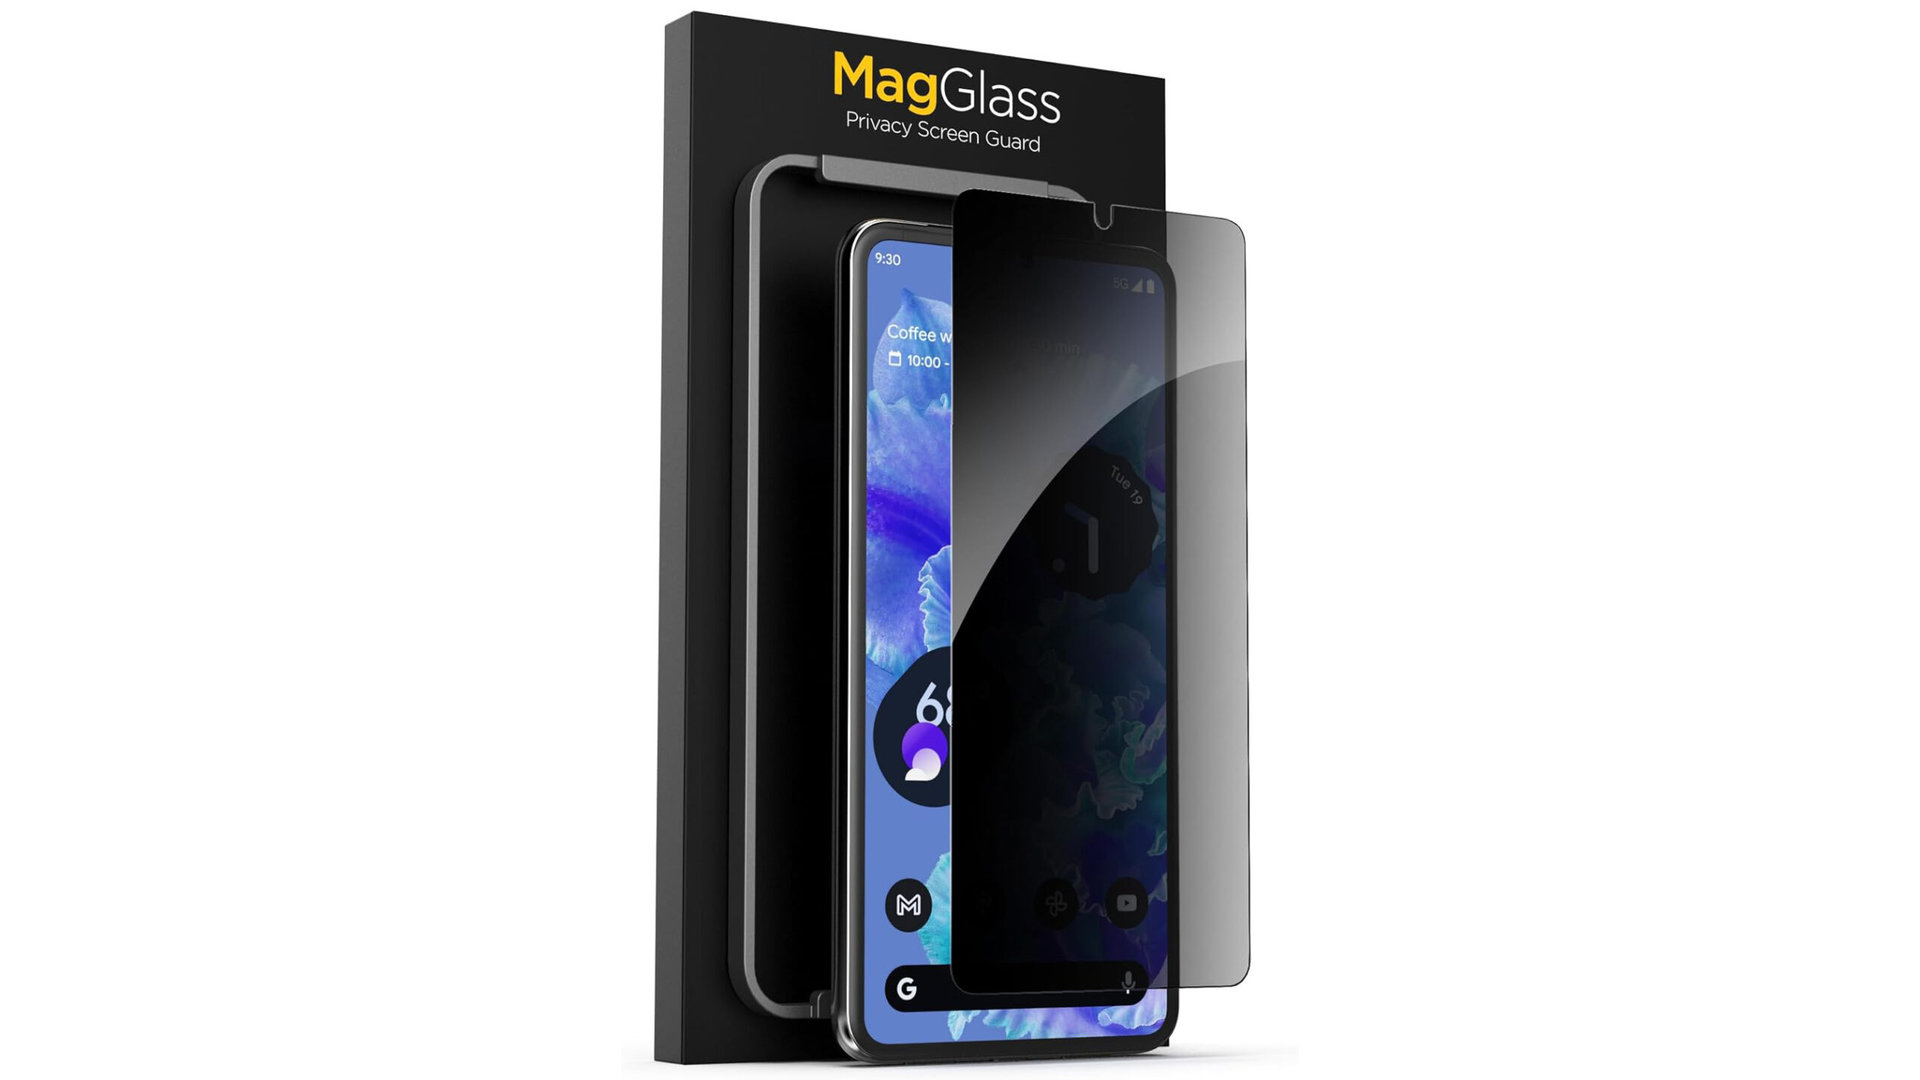 Magglass Tempered Glass Designed for Samsung Galaxy S22 Ultra Privacy  Screen Protector, Anti Spy Display Guard (Case Compatible)